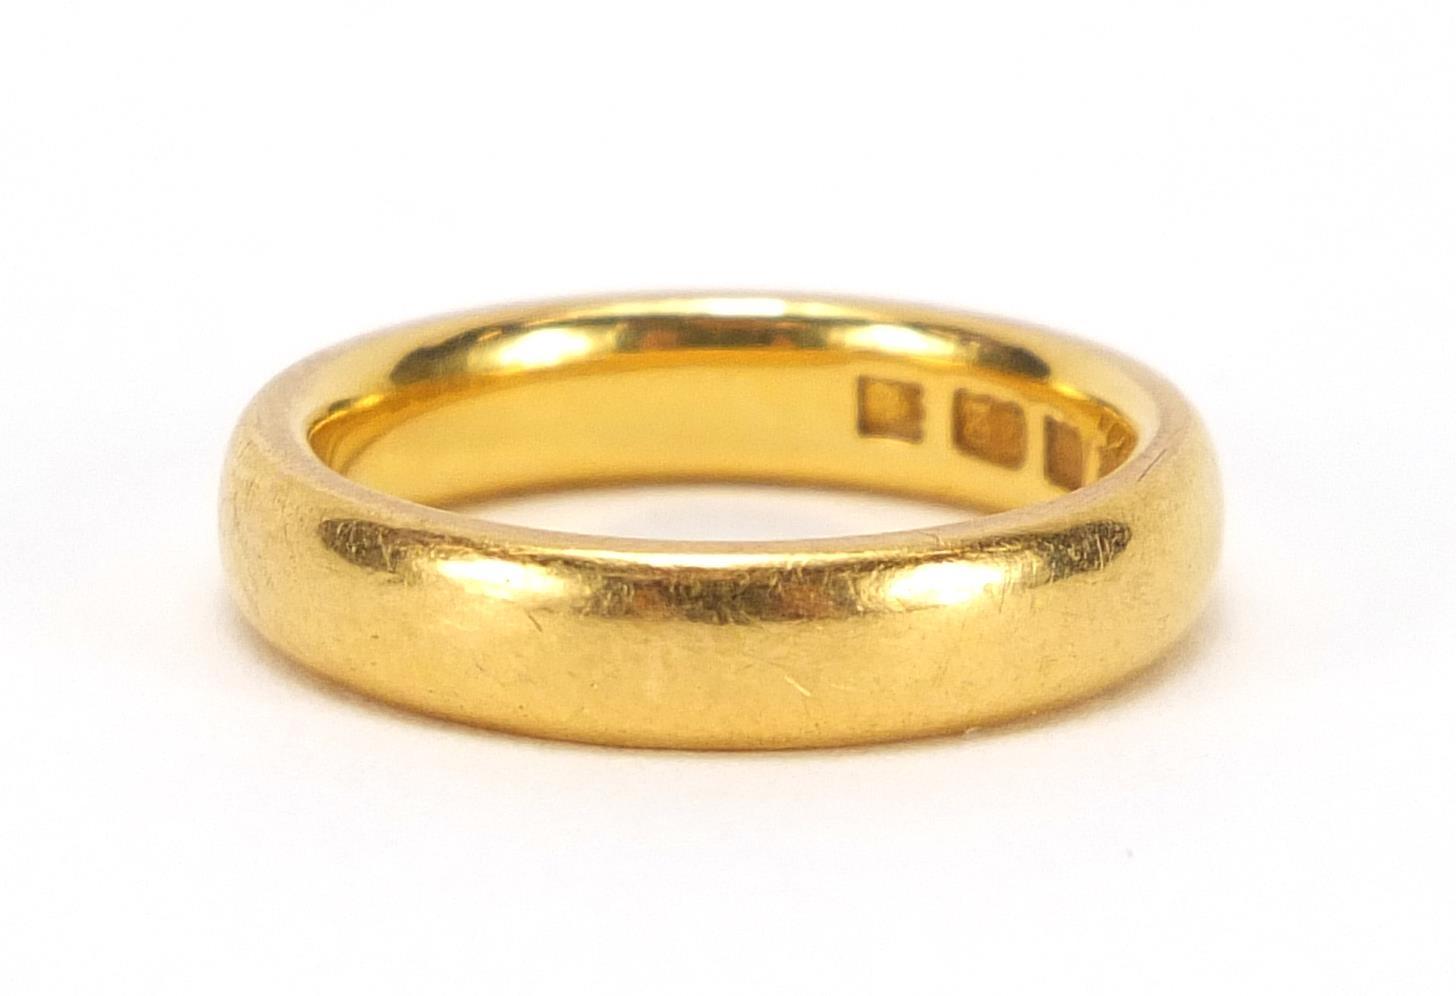 22ct gold wedding band, size K, approximate weight 7.3g : For Extra Condition Reports Please visit - Image 2 of 3